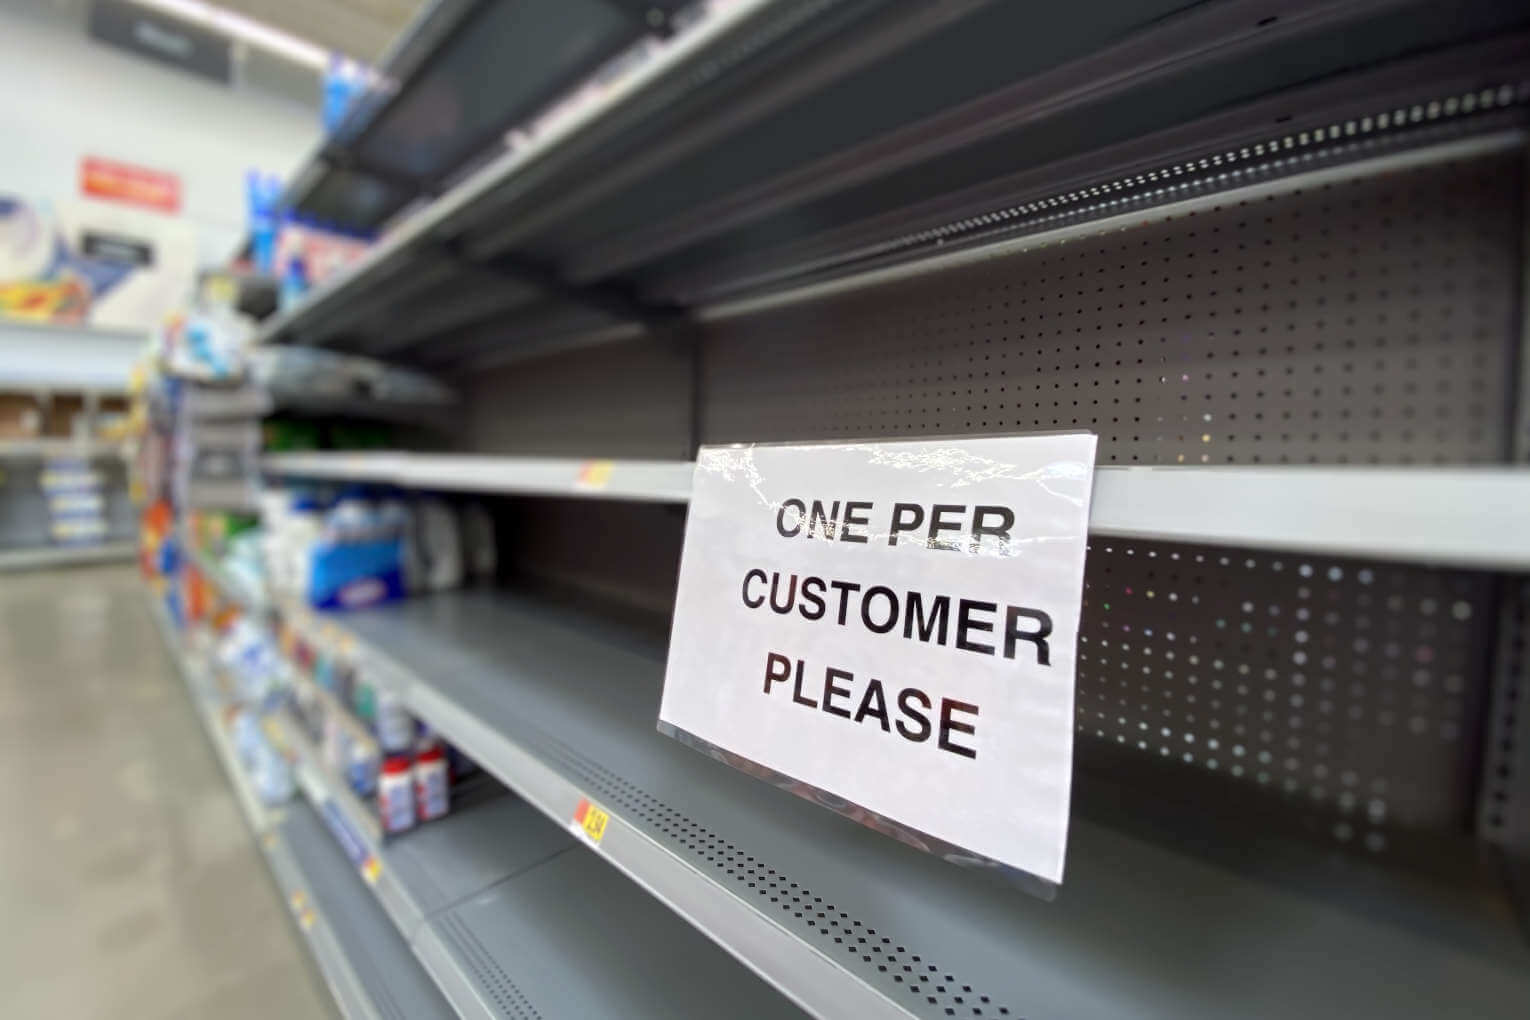 Government Emergency Warning Sparks Supermarket Panic Buying Fears